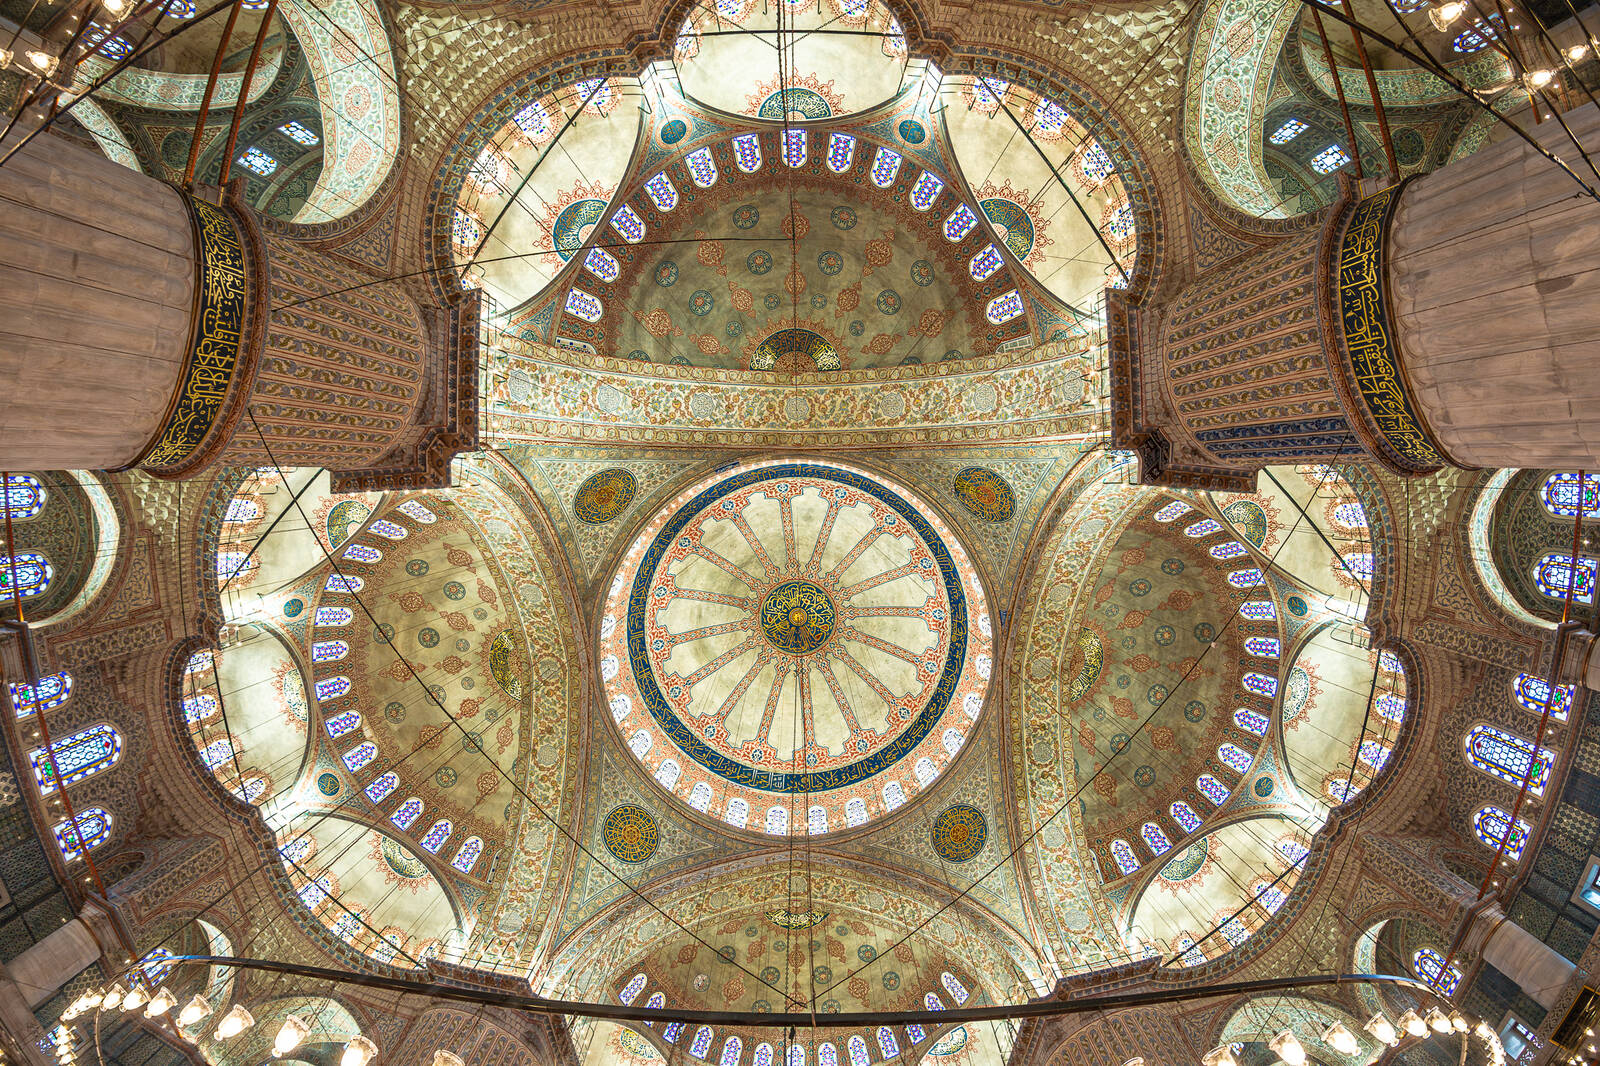 Image of Blue Mosque by James Billings.